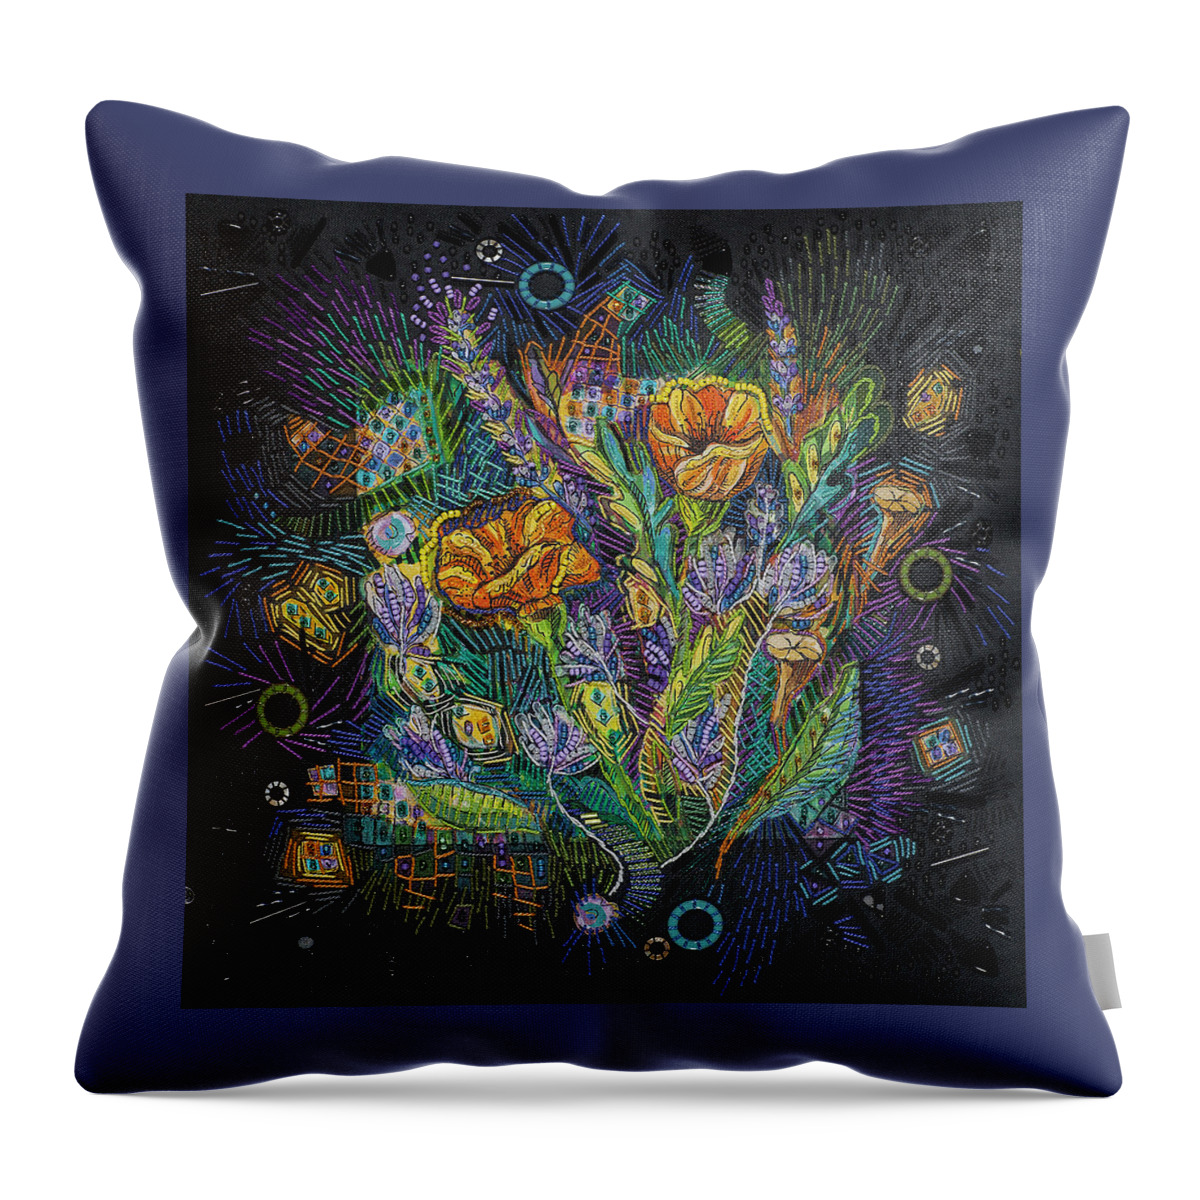  Throw Pillow featuring the tapestry - textile Hope by Janice A Larson